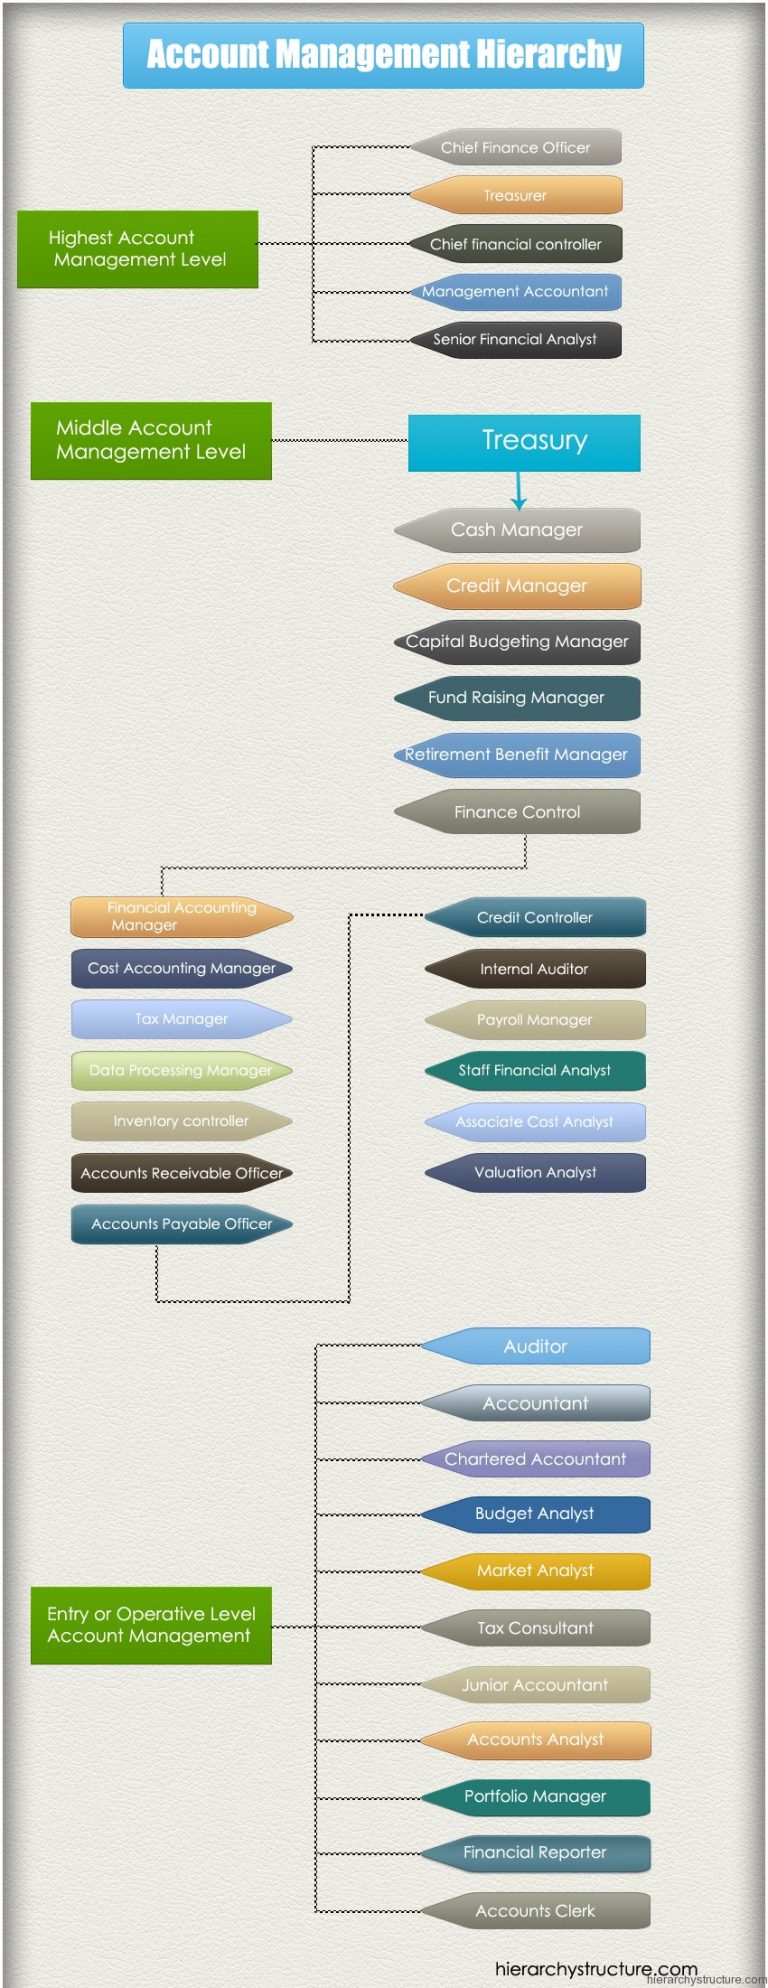 Account Management Hierarchy